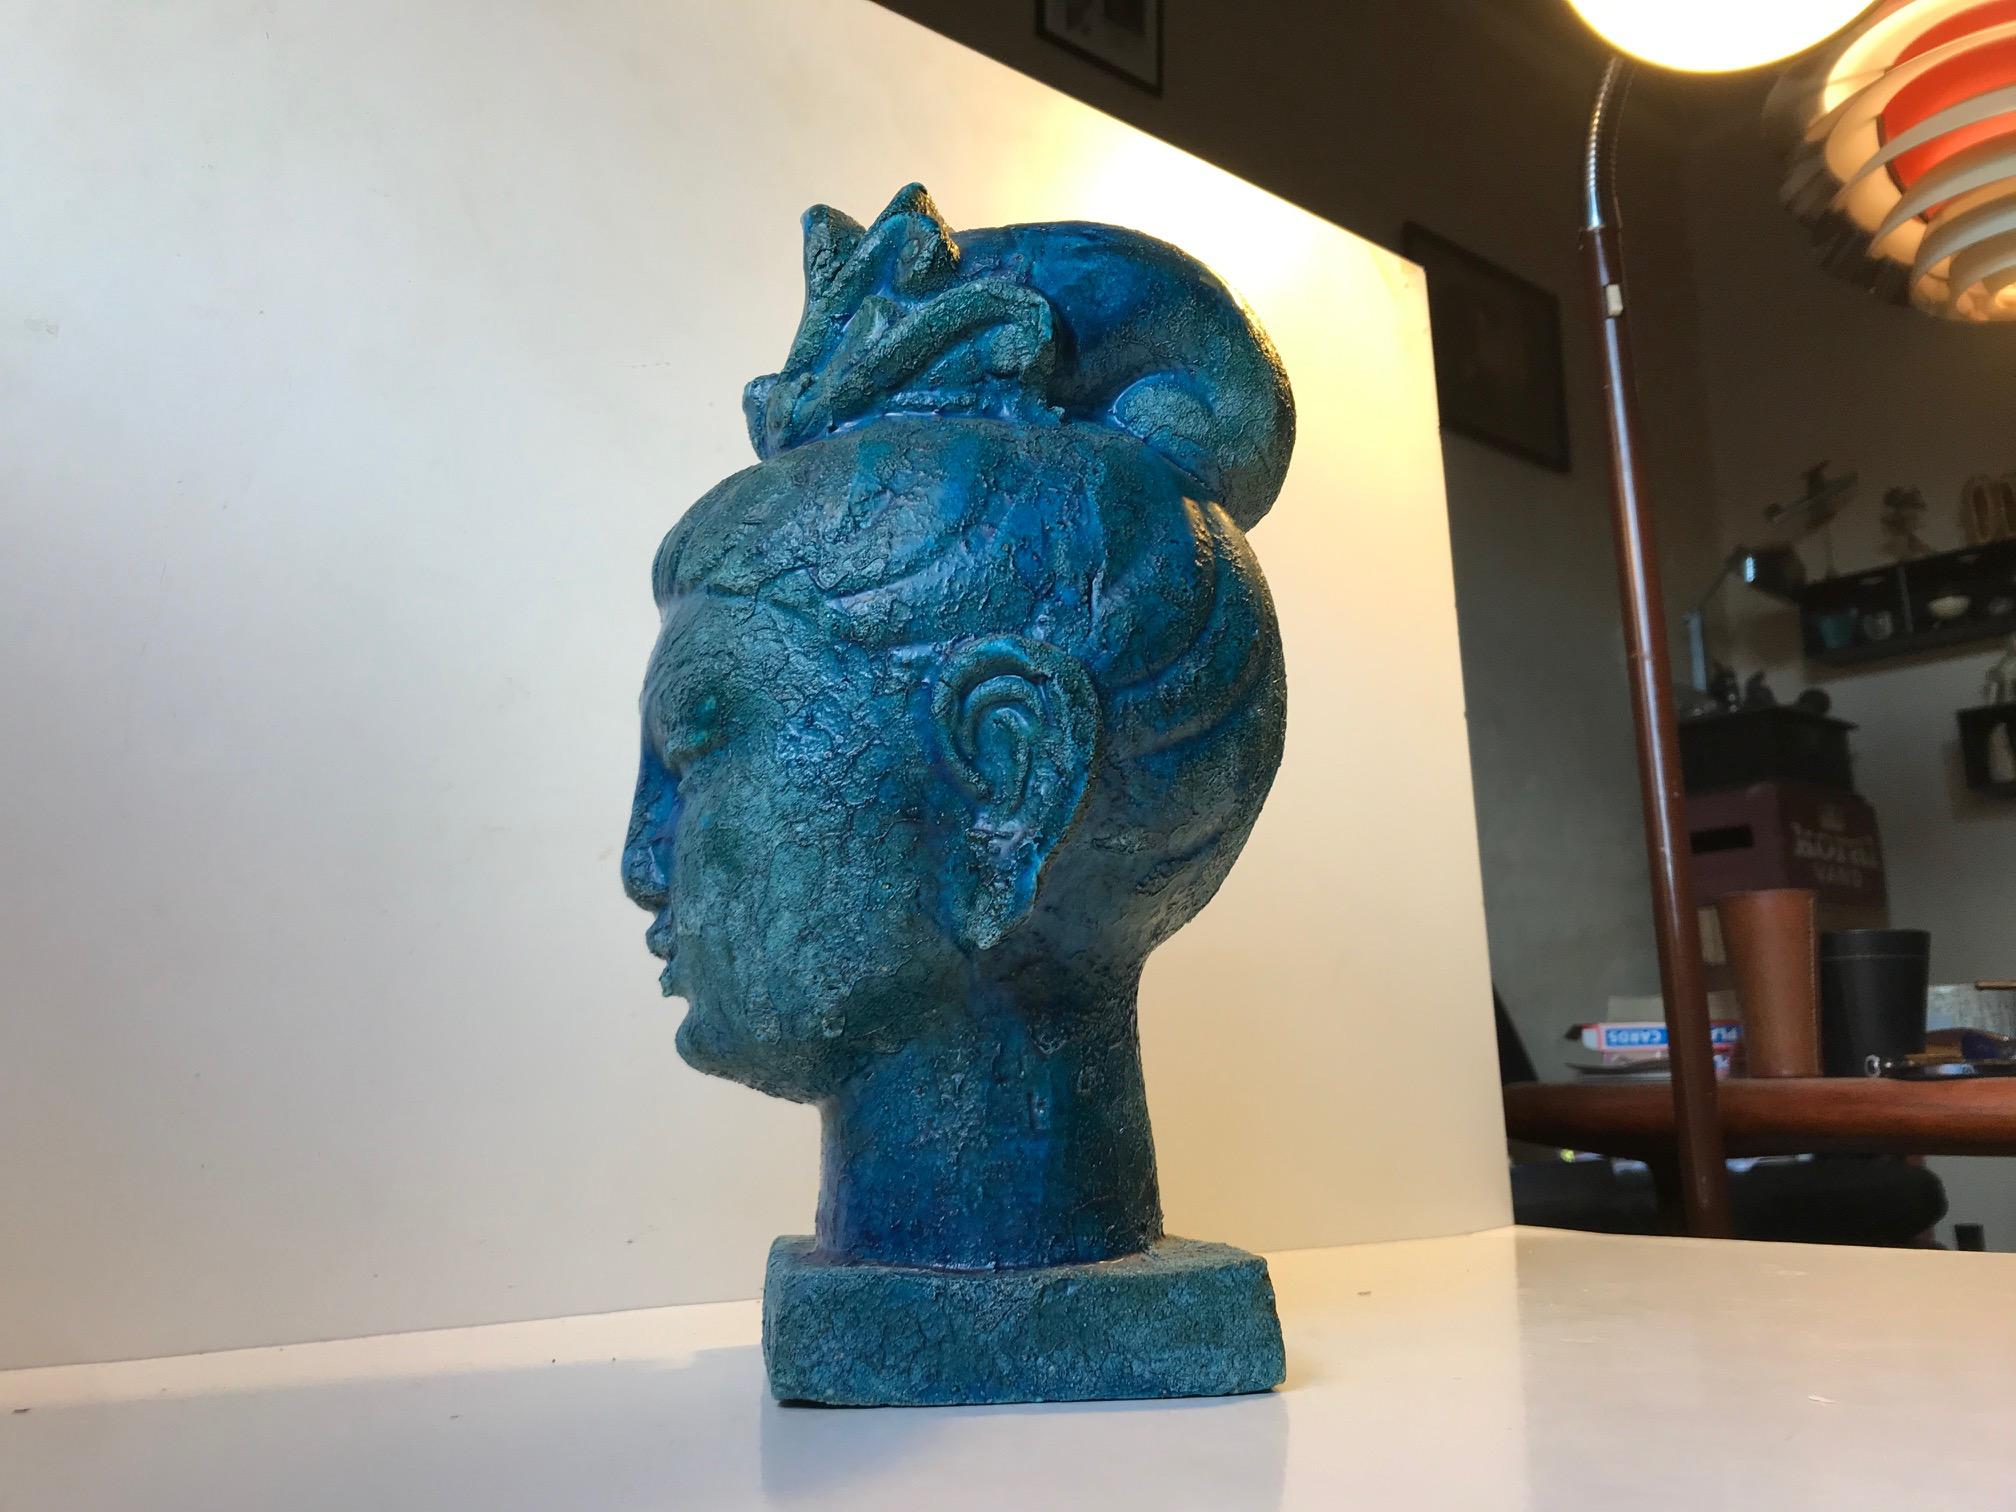 Aldo Londi Buddha head in the blue/turquoise 'Cinese' (Chinese) glaze, mimicking ancient bronzes that has been resting on the ocean floor for millennia. This is number 47 of 104 made. It was manufactured by Bitossi in Italy in the late 1960s. This